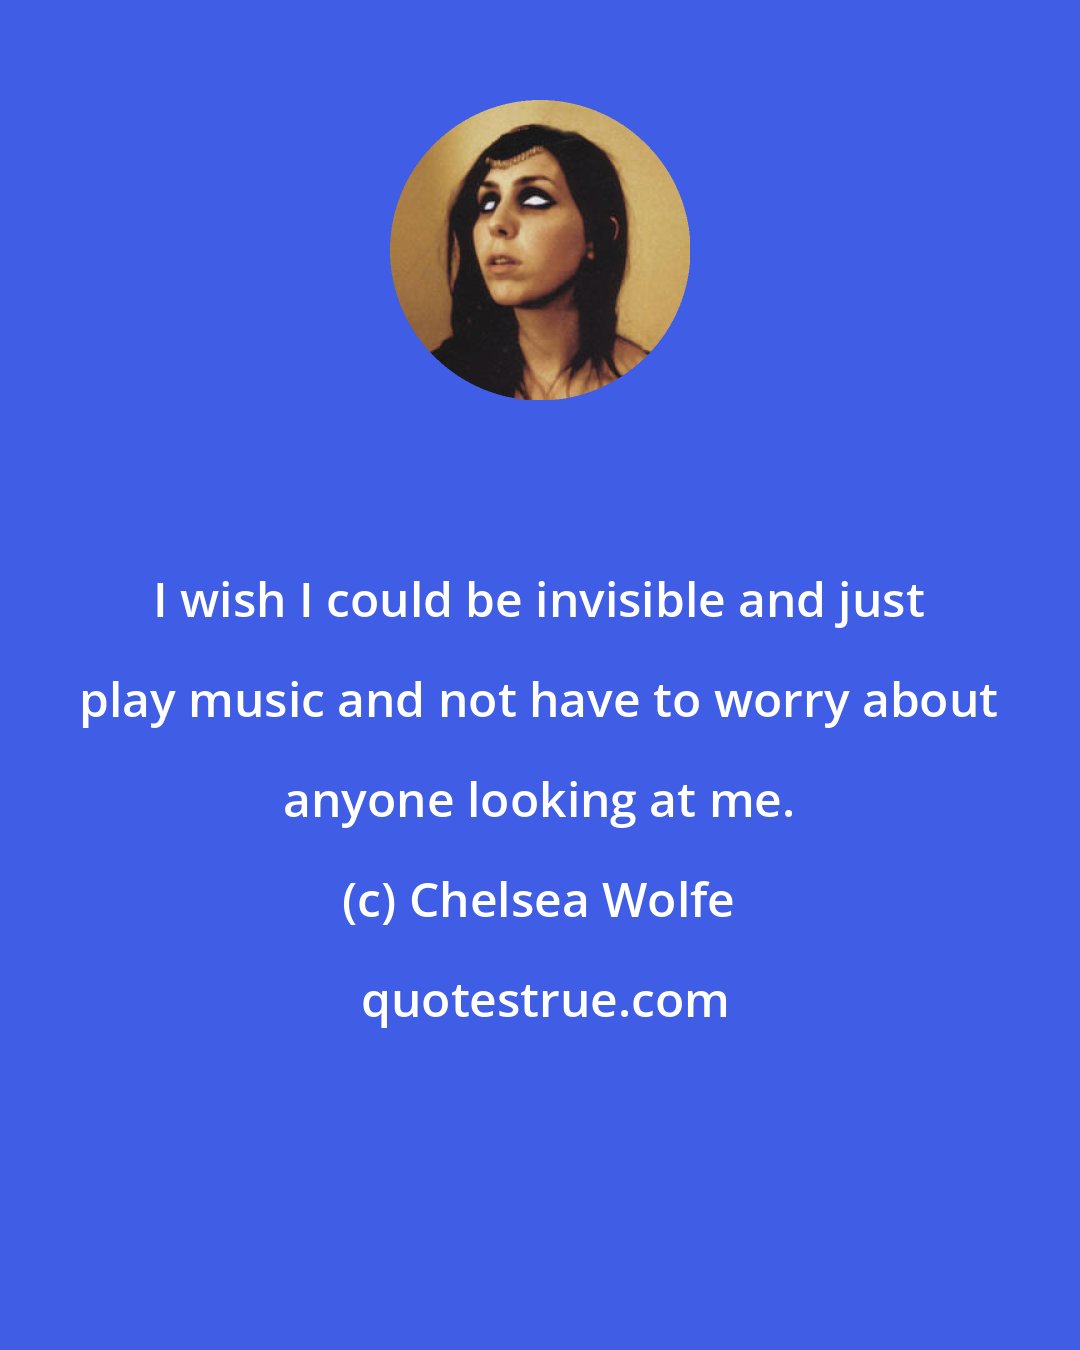 Chelsea Wolfe: I wish I could be invisible and just play music and not have to worry about anyone looking at me.